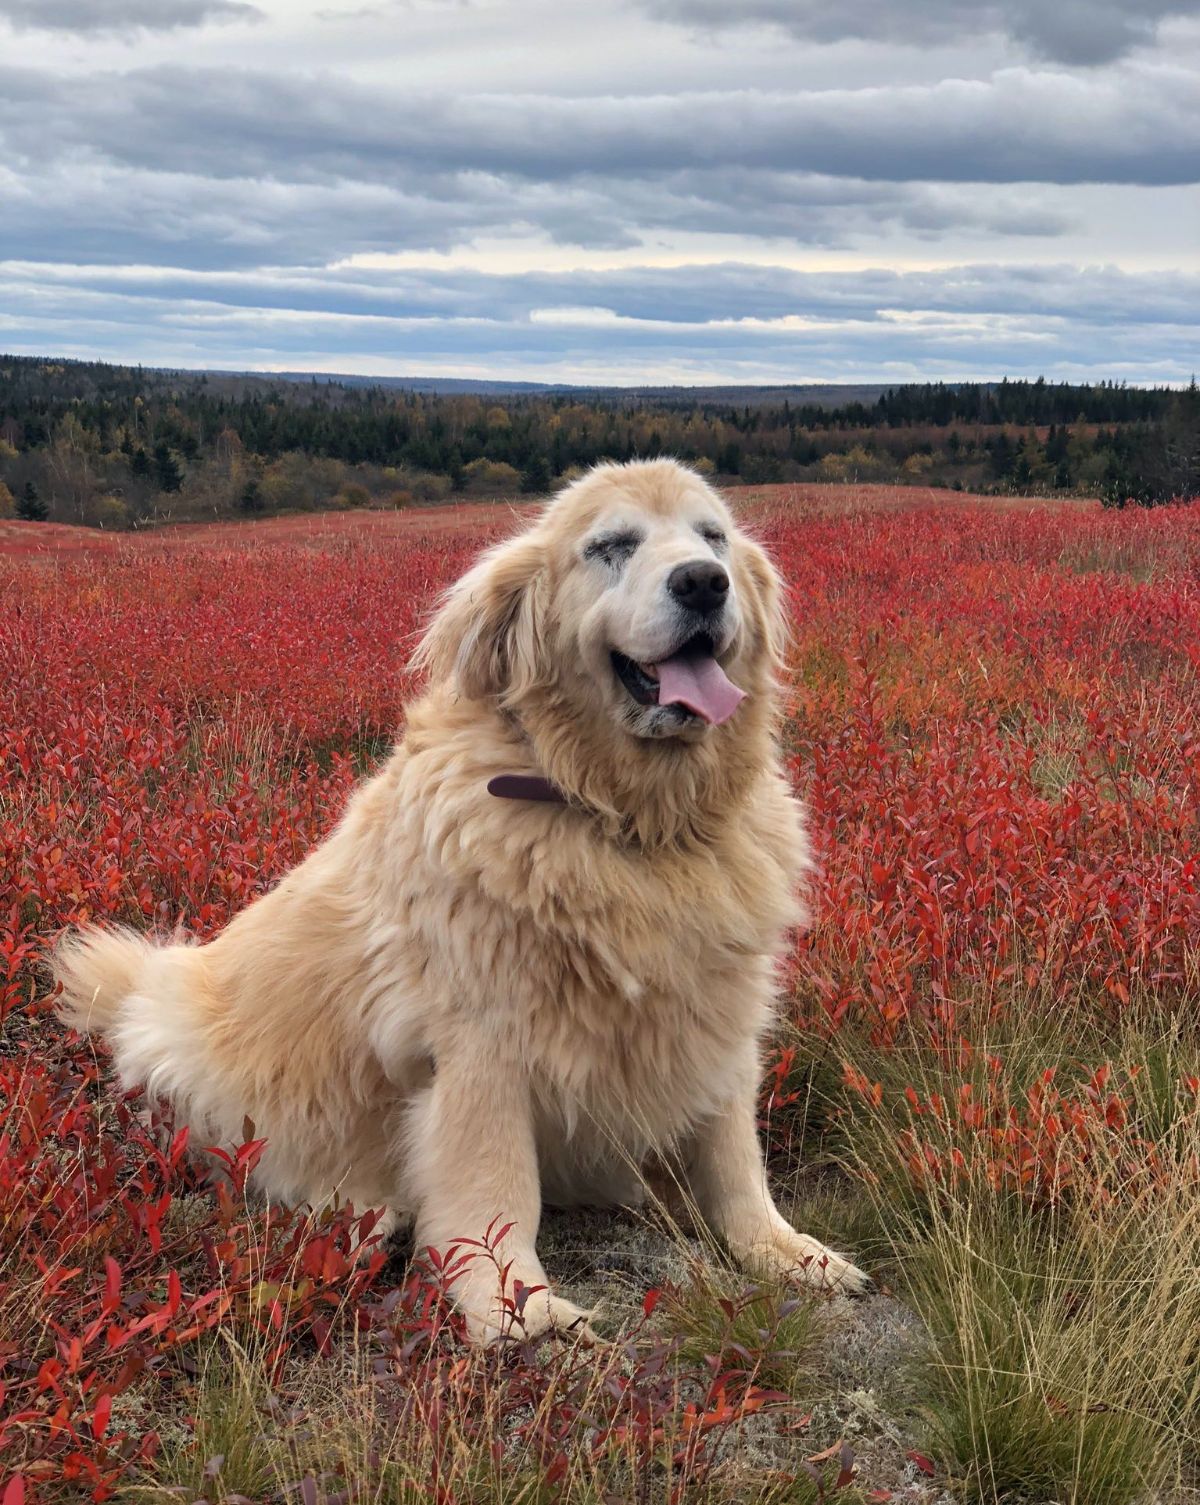 old golden retriever sitting in a field of red flowers